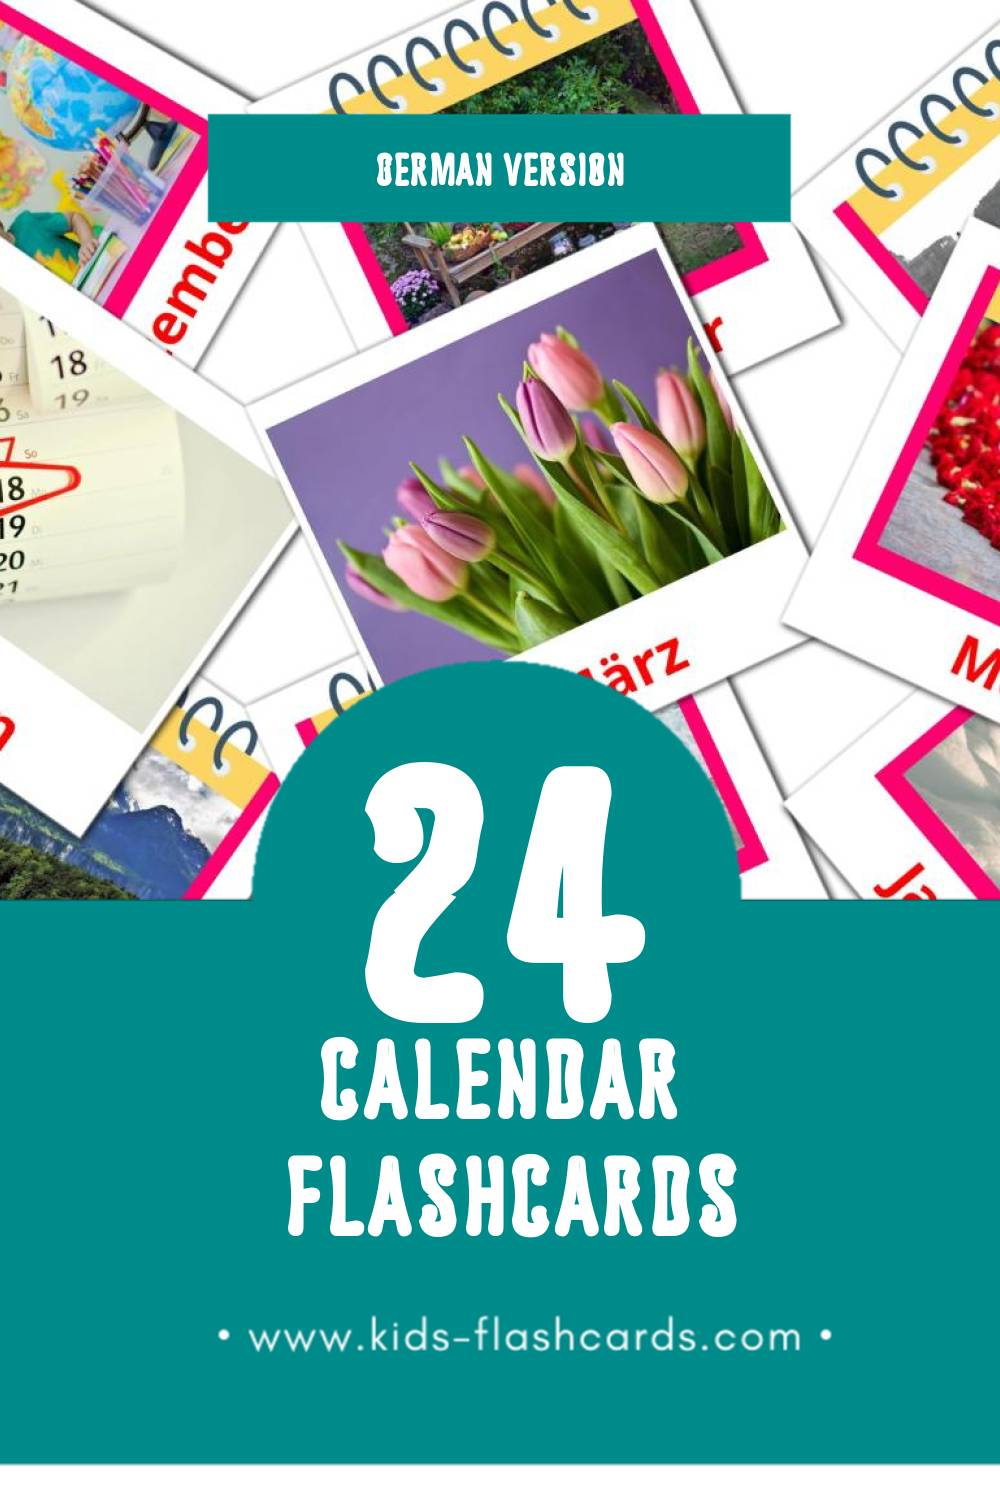 Visual Kalender Flashcards for Toddlers (24 cards in German)